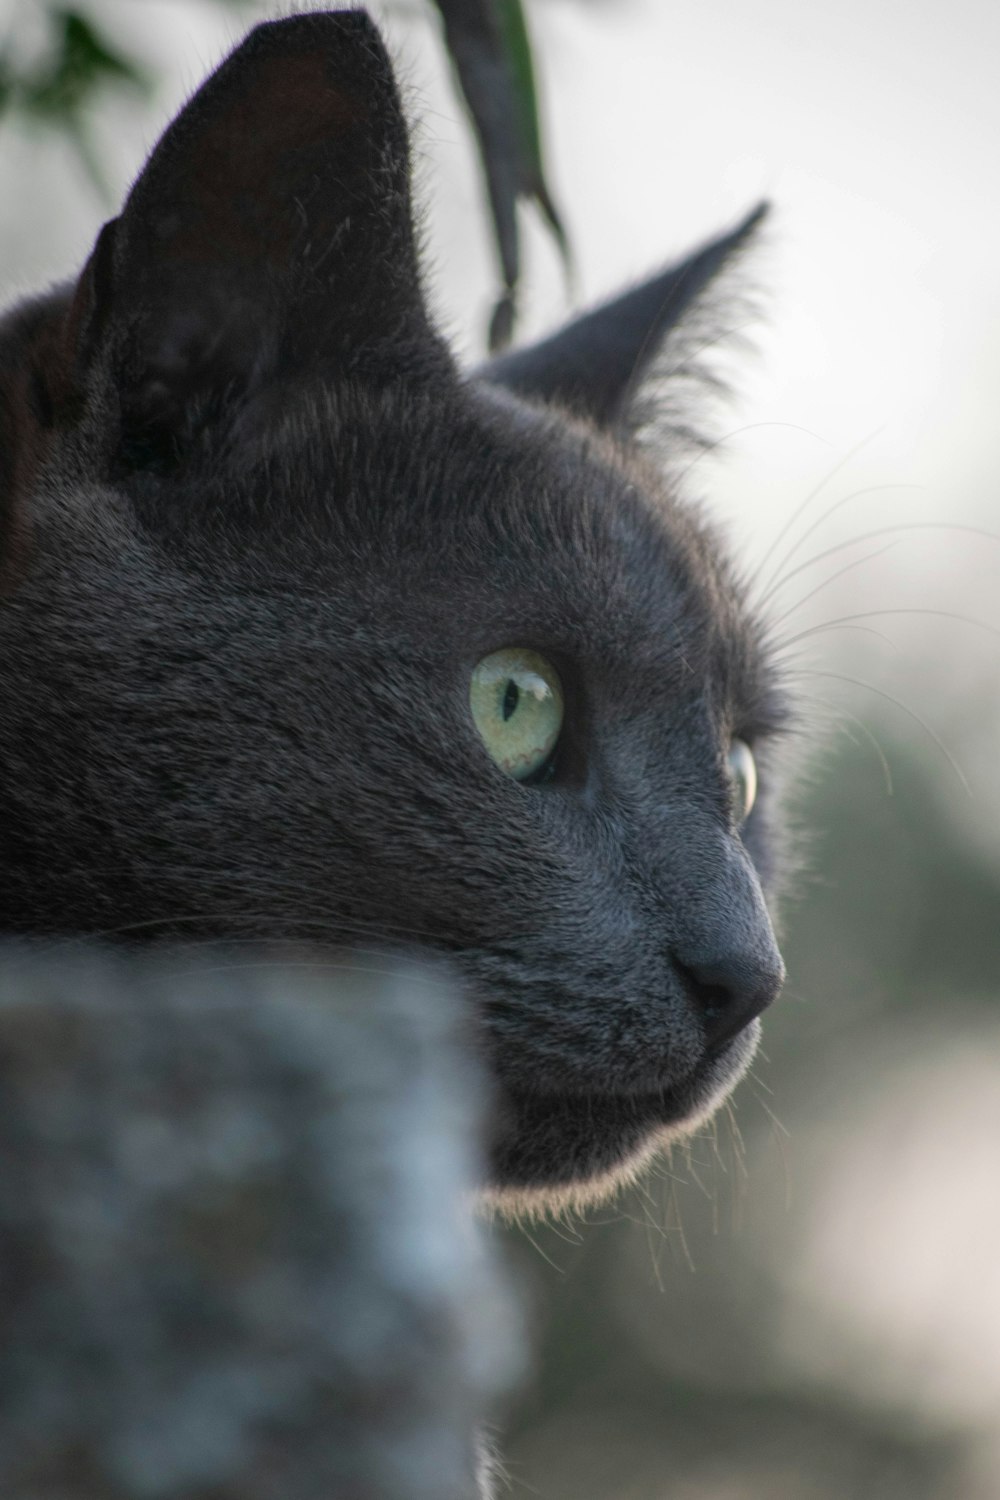 a close up of a black cat with green eyes